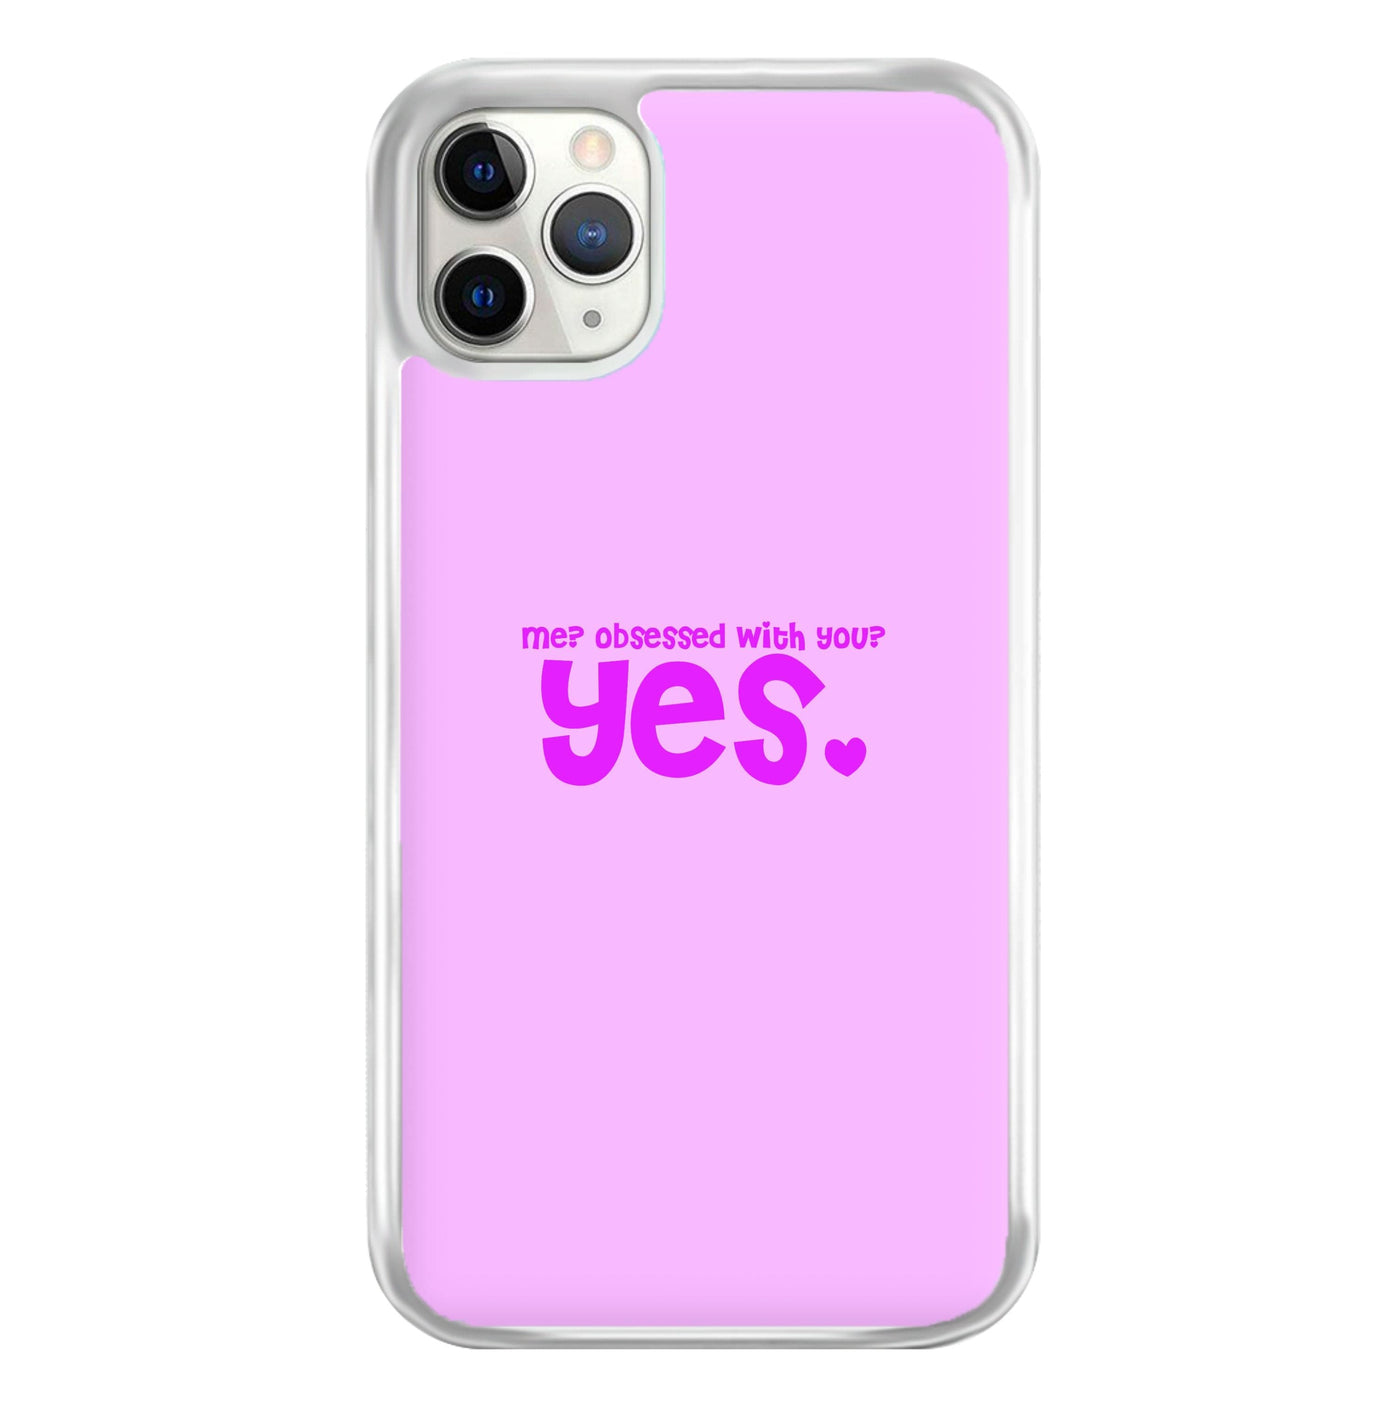 Me? Obessed With You? Yes - TikTok Trends Phone Case